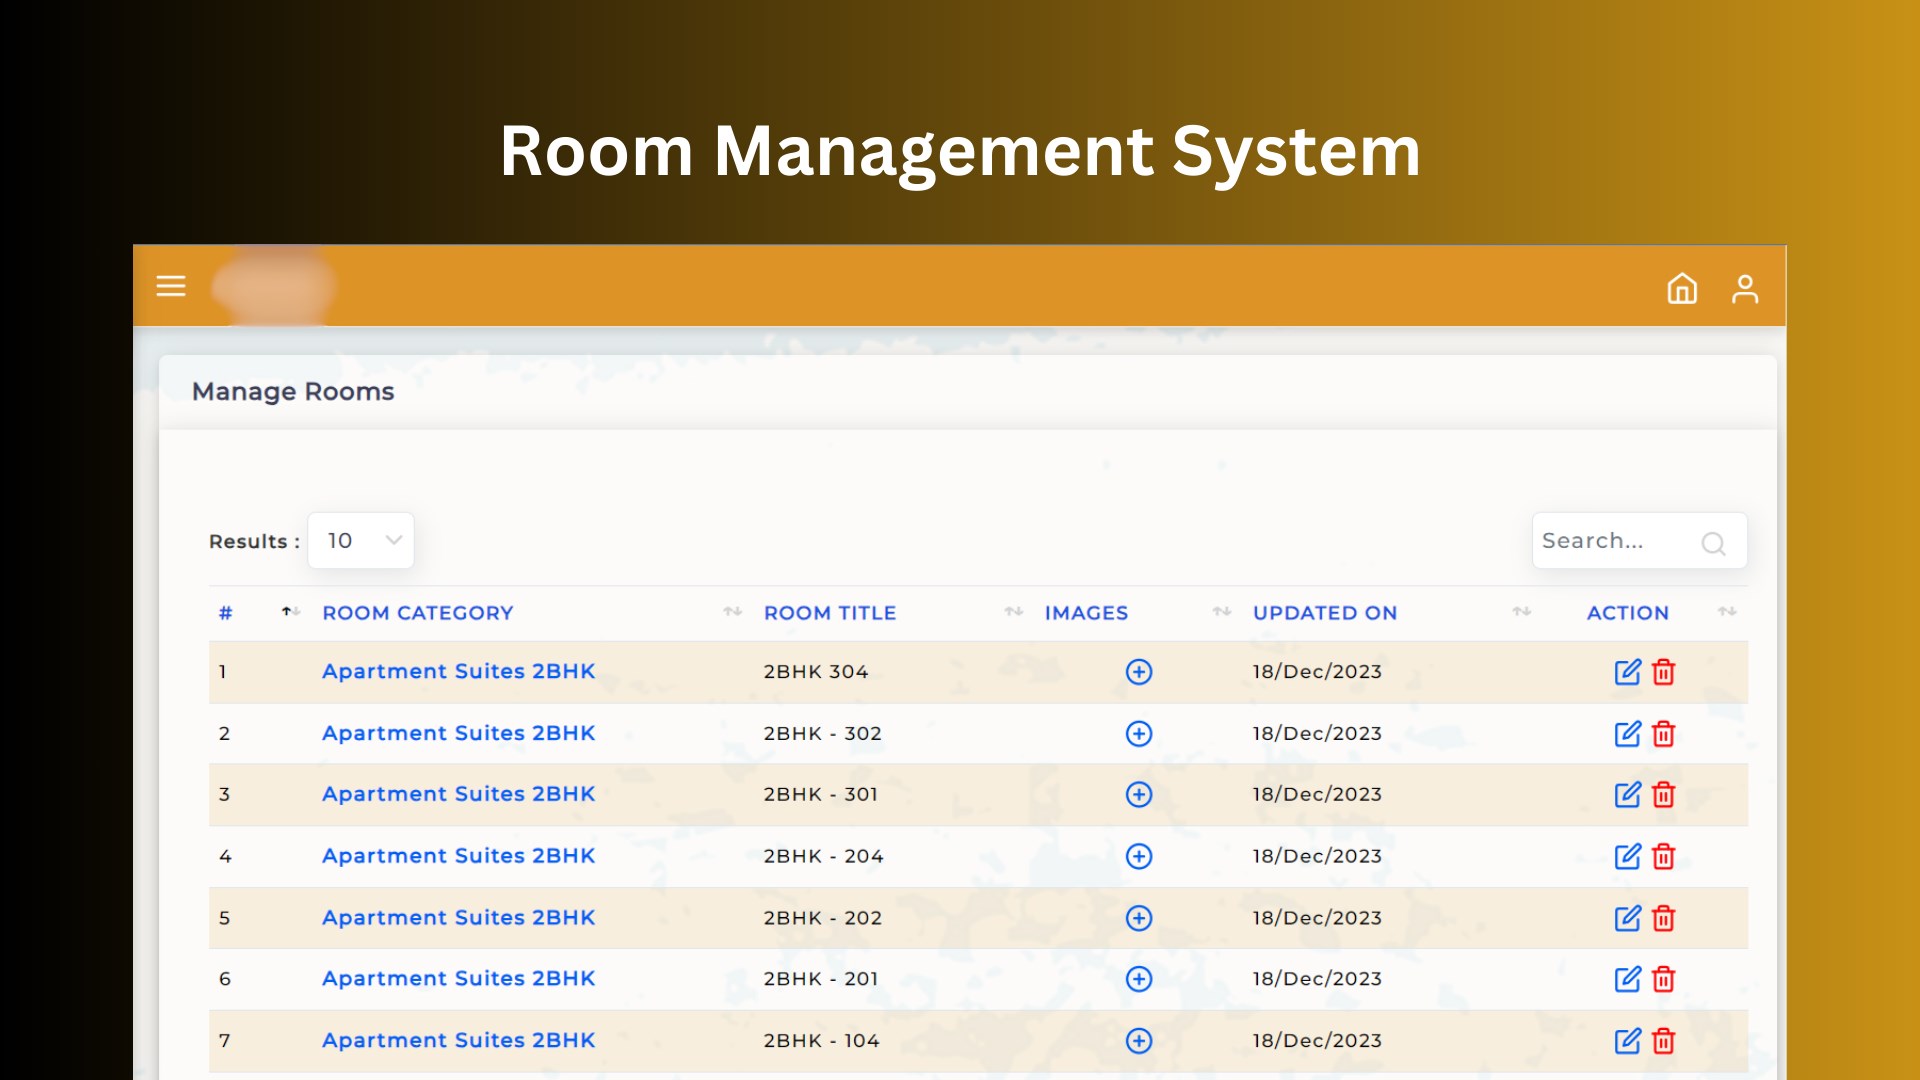 Robust room booking management system with capabilities for adding, editing, and deleting room details and images, while also offering the flexibility to set custom pricing for weekdays and weekends.